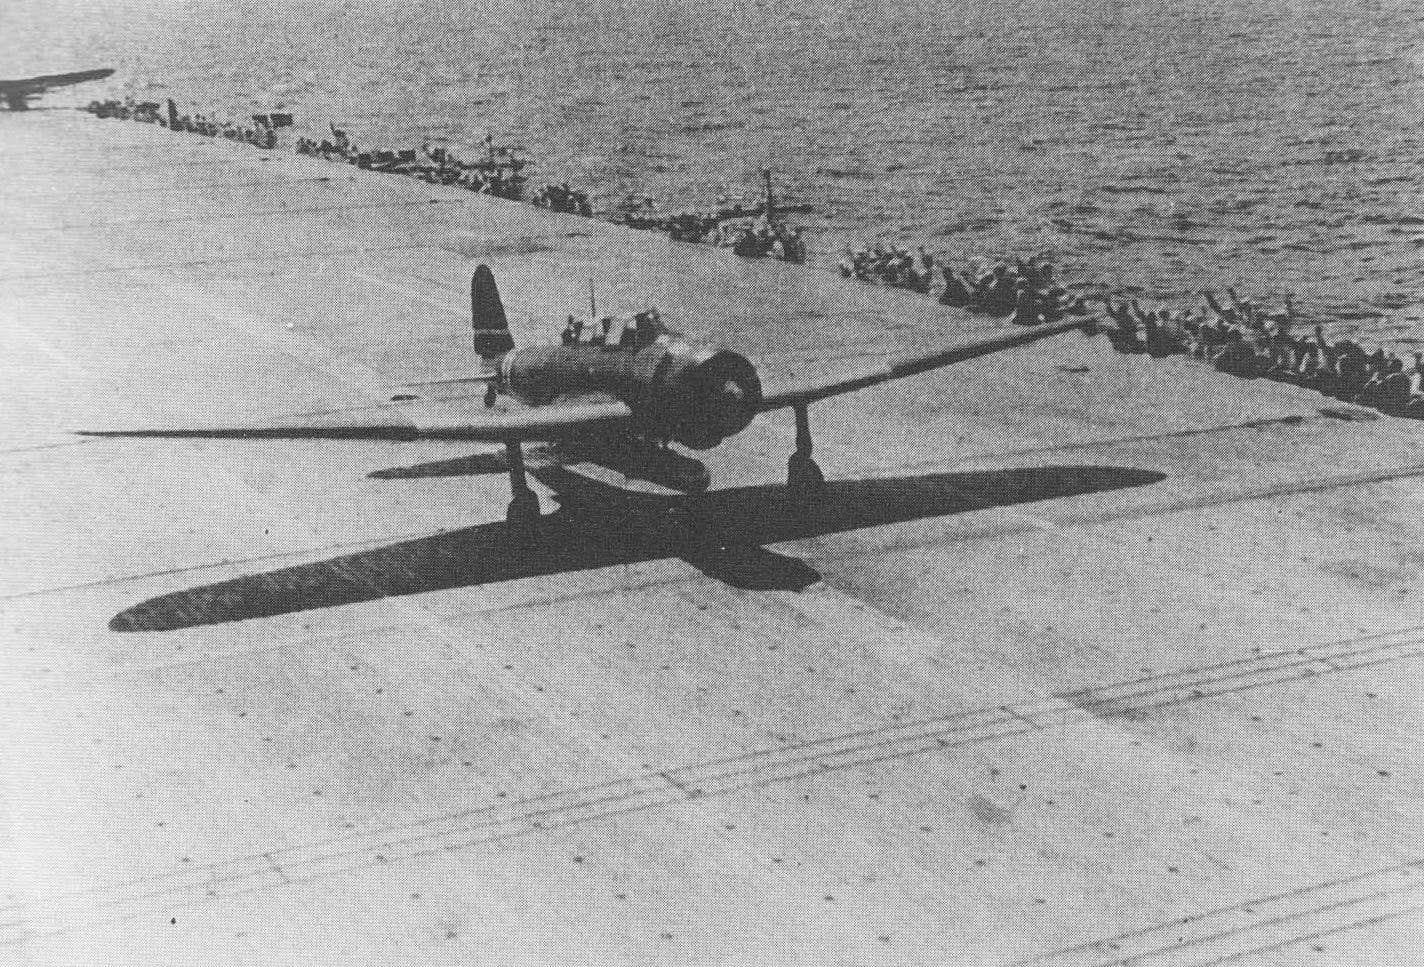 A Nakajima B5N "Kate" on Shokaku during the Battle of the Coral Sea. The Japanese carriers brought 51 of these planes to the Coral Sea.<br>(Imperial Japanese Navy)